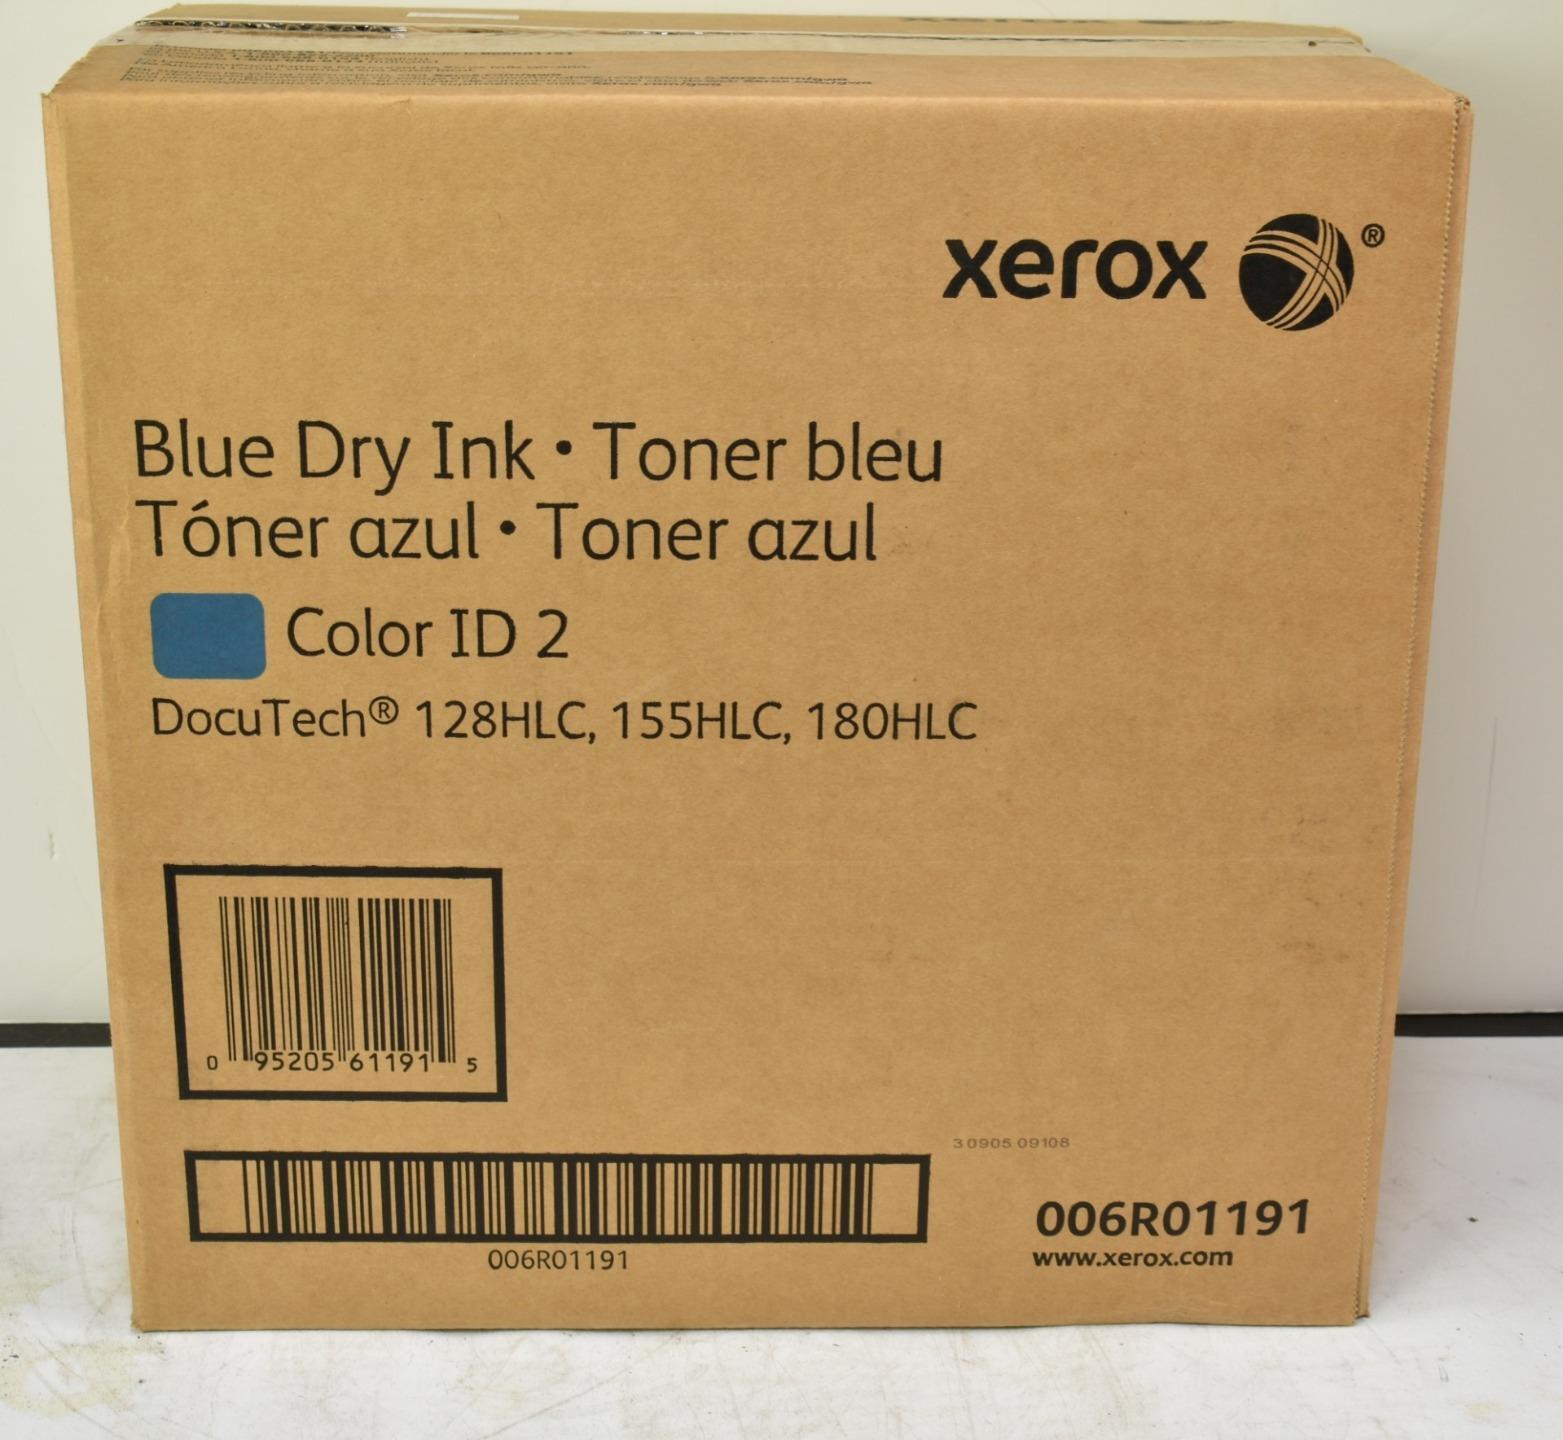 Box Of 3 Xerox Blue Dry Ink Color ID 2 006R01191 Docutech 128HLC,155HLC, 180HLC